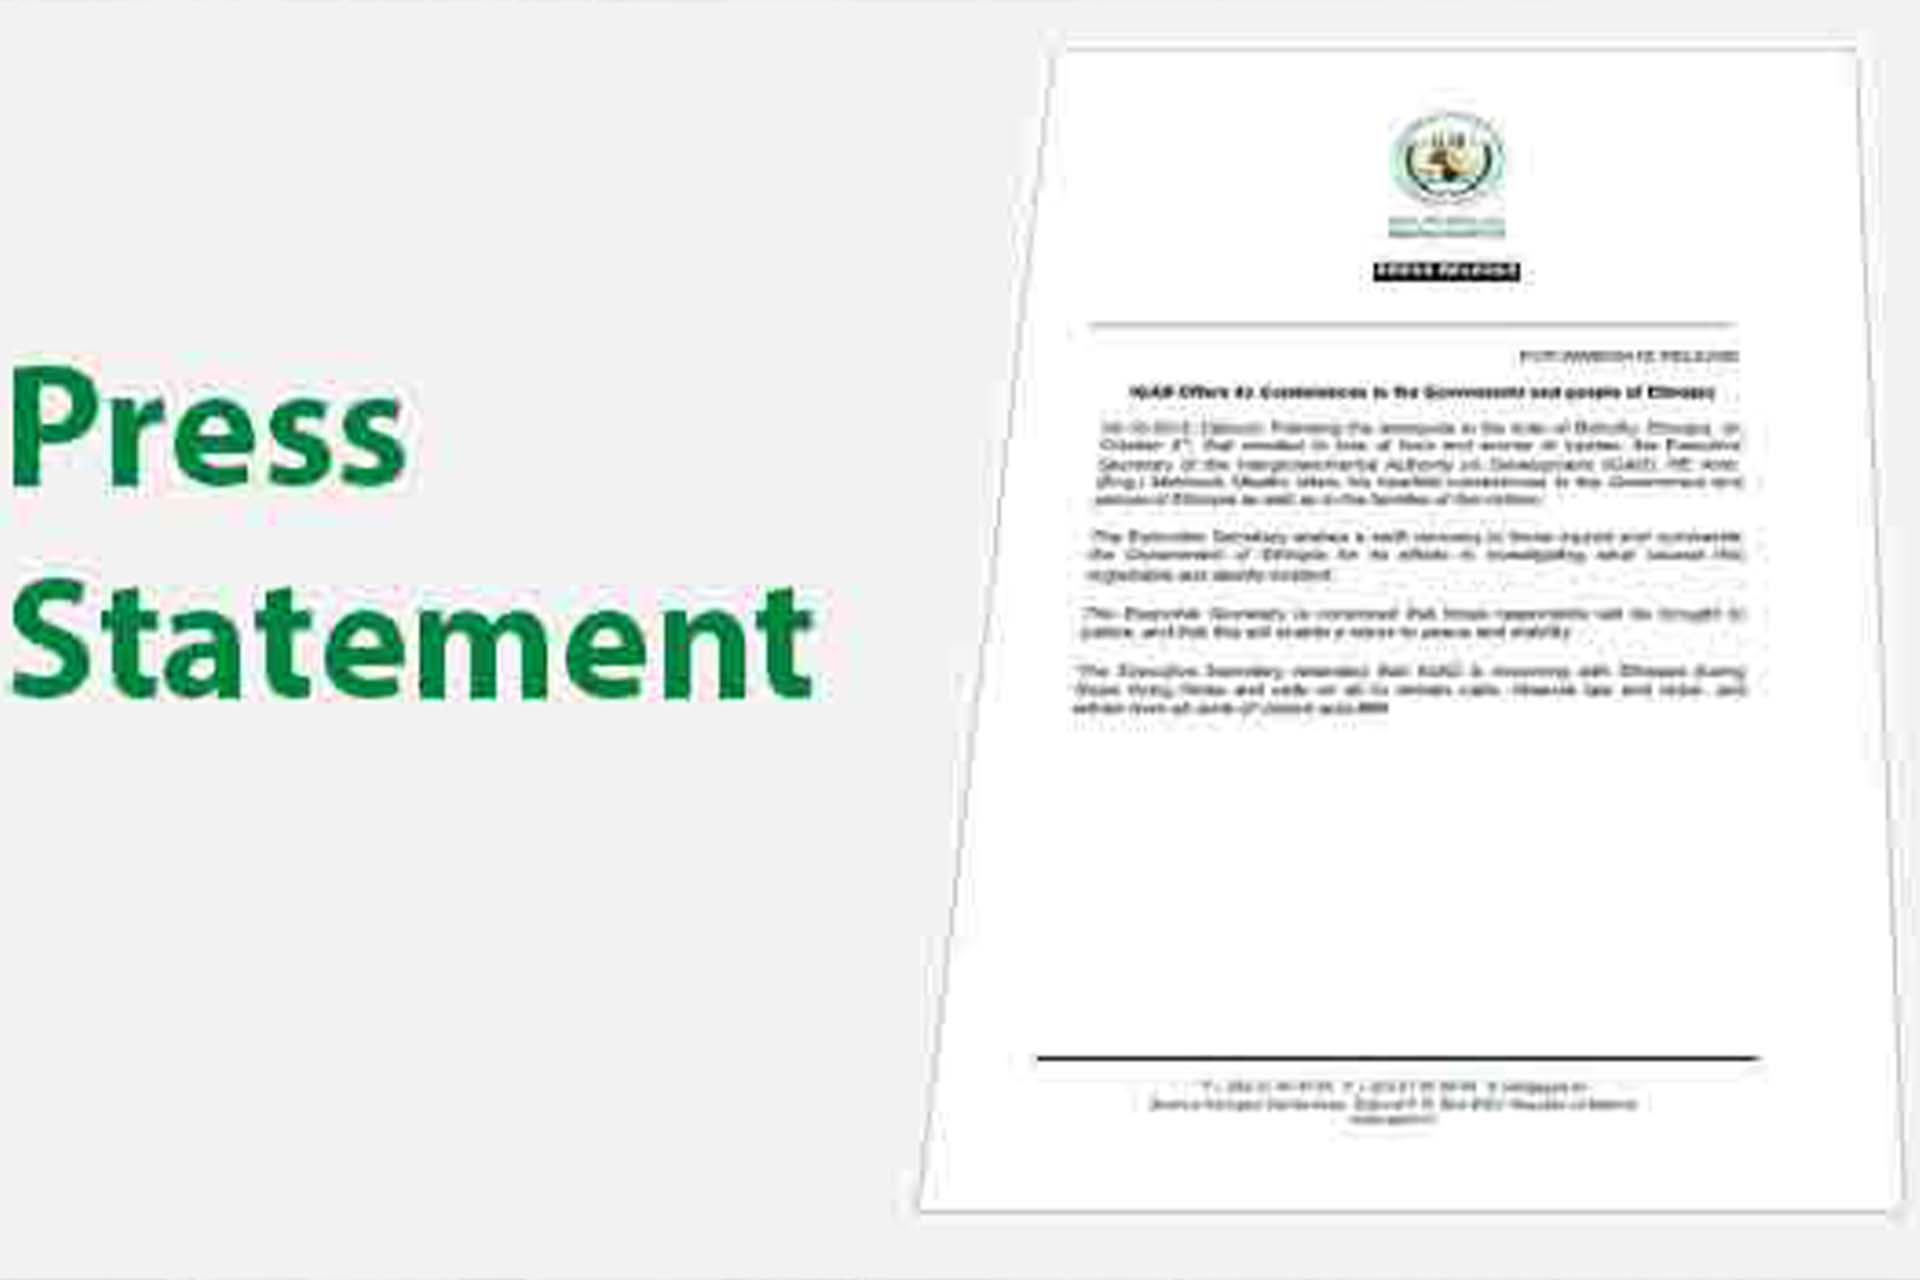 IGAD Welcomes The Successful Conclusion Of The FGS-FMS Summit